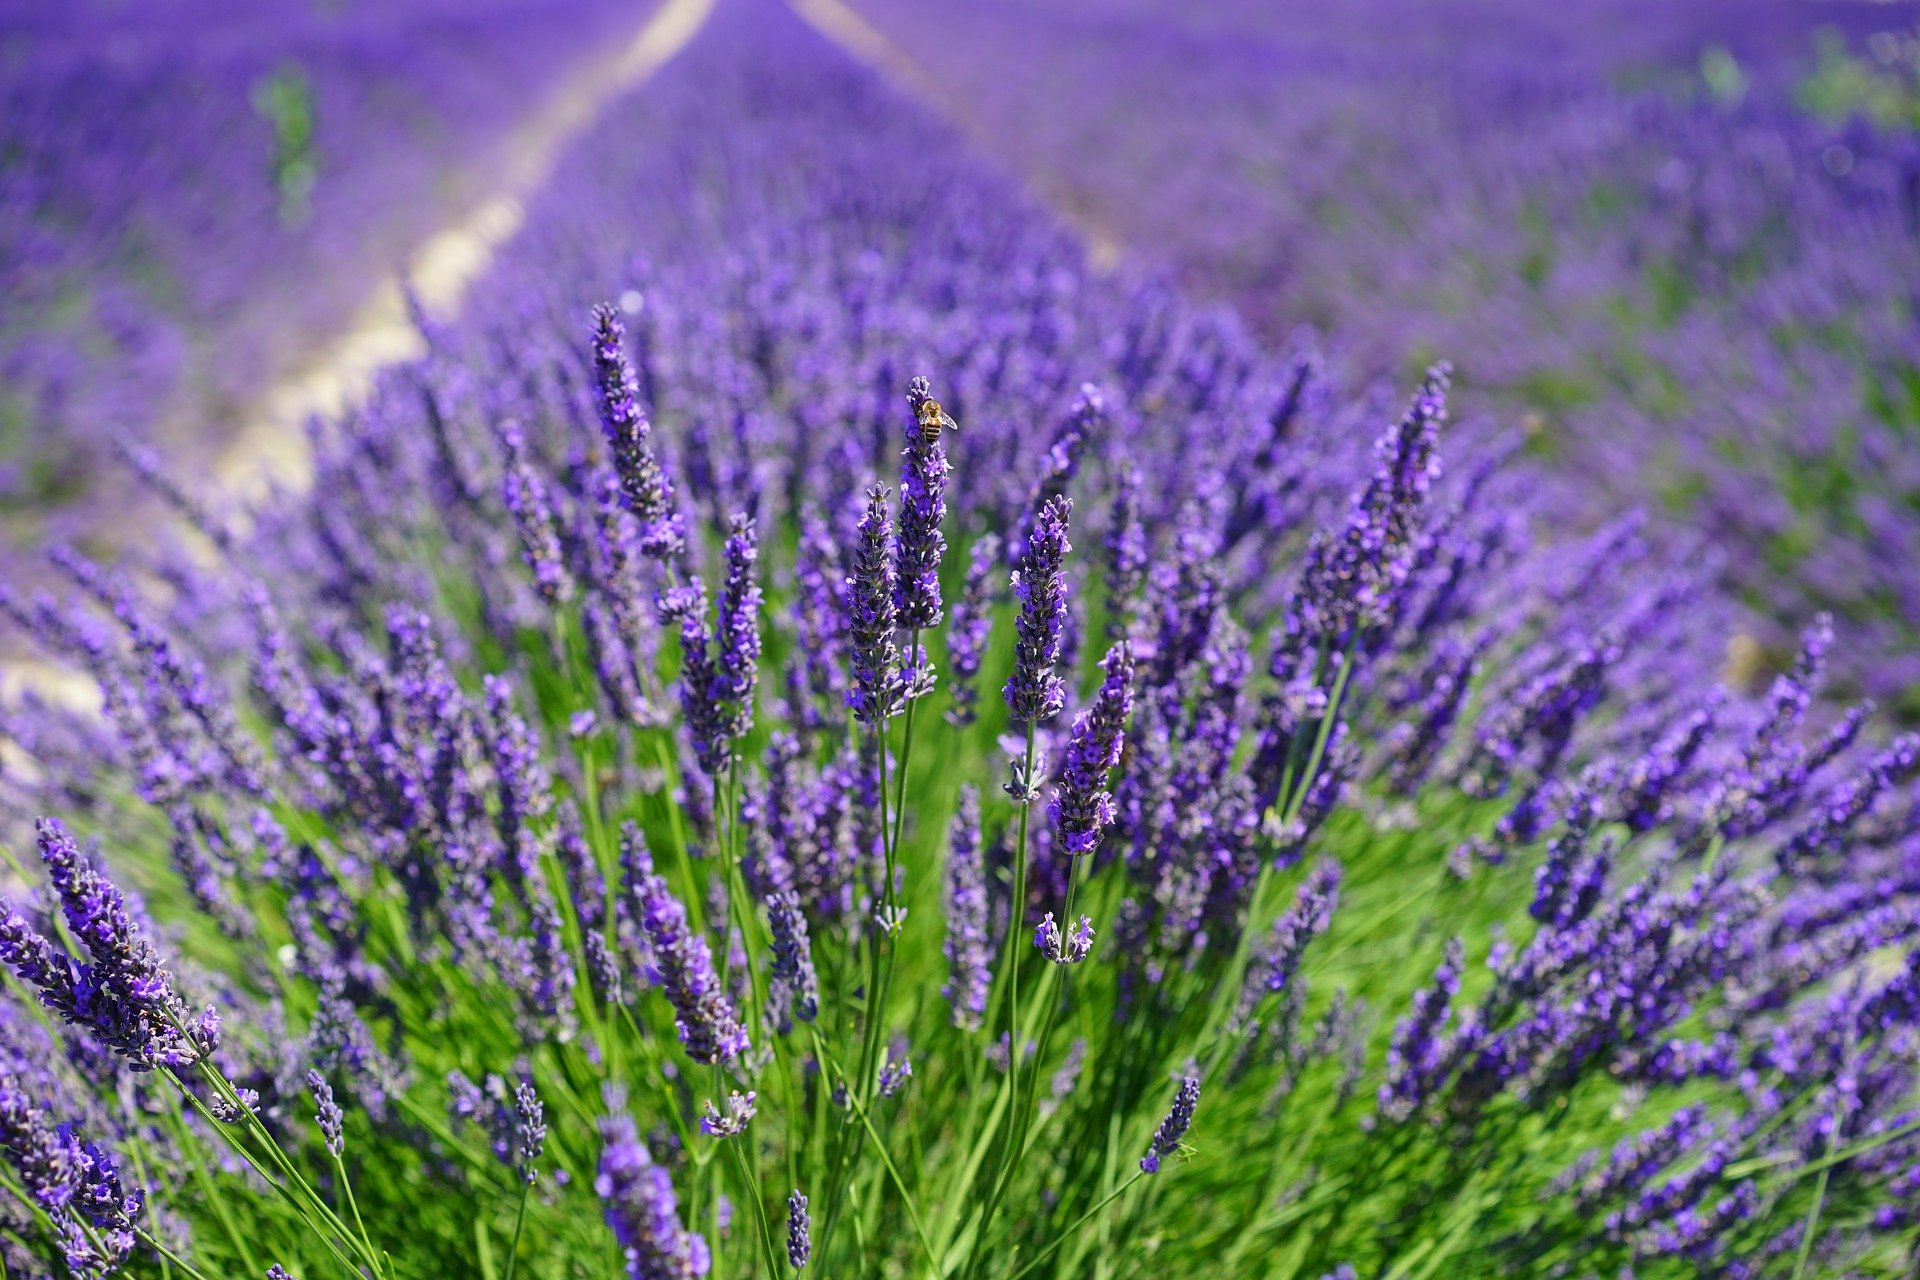 Lavender: How to Plant, Grow, and Care for Lavender | The Old ...